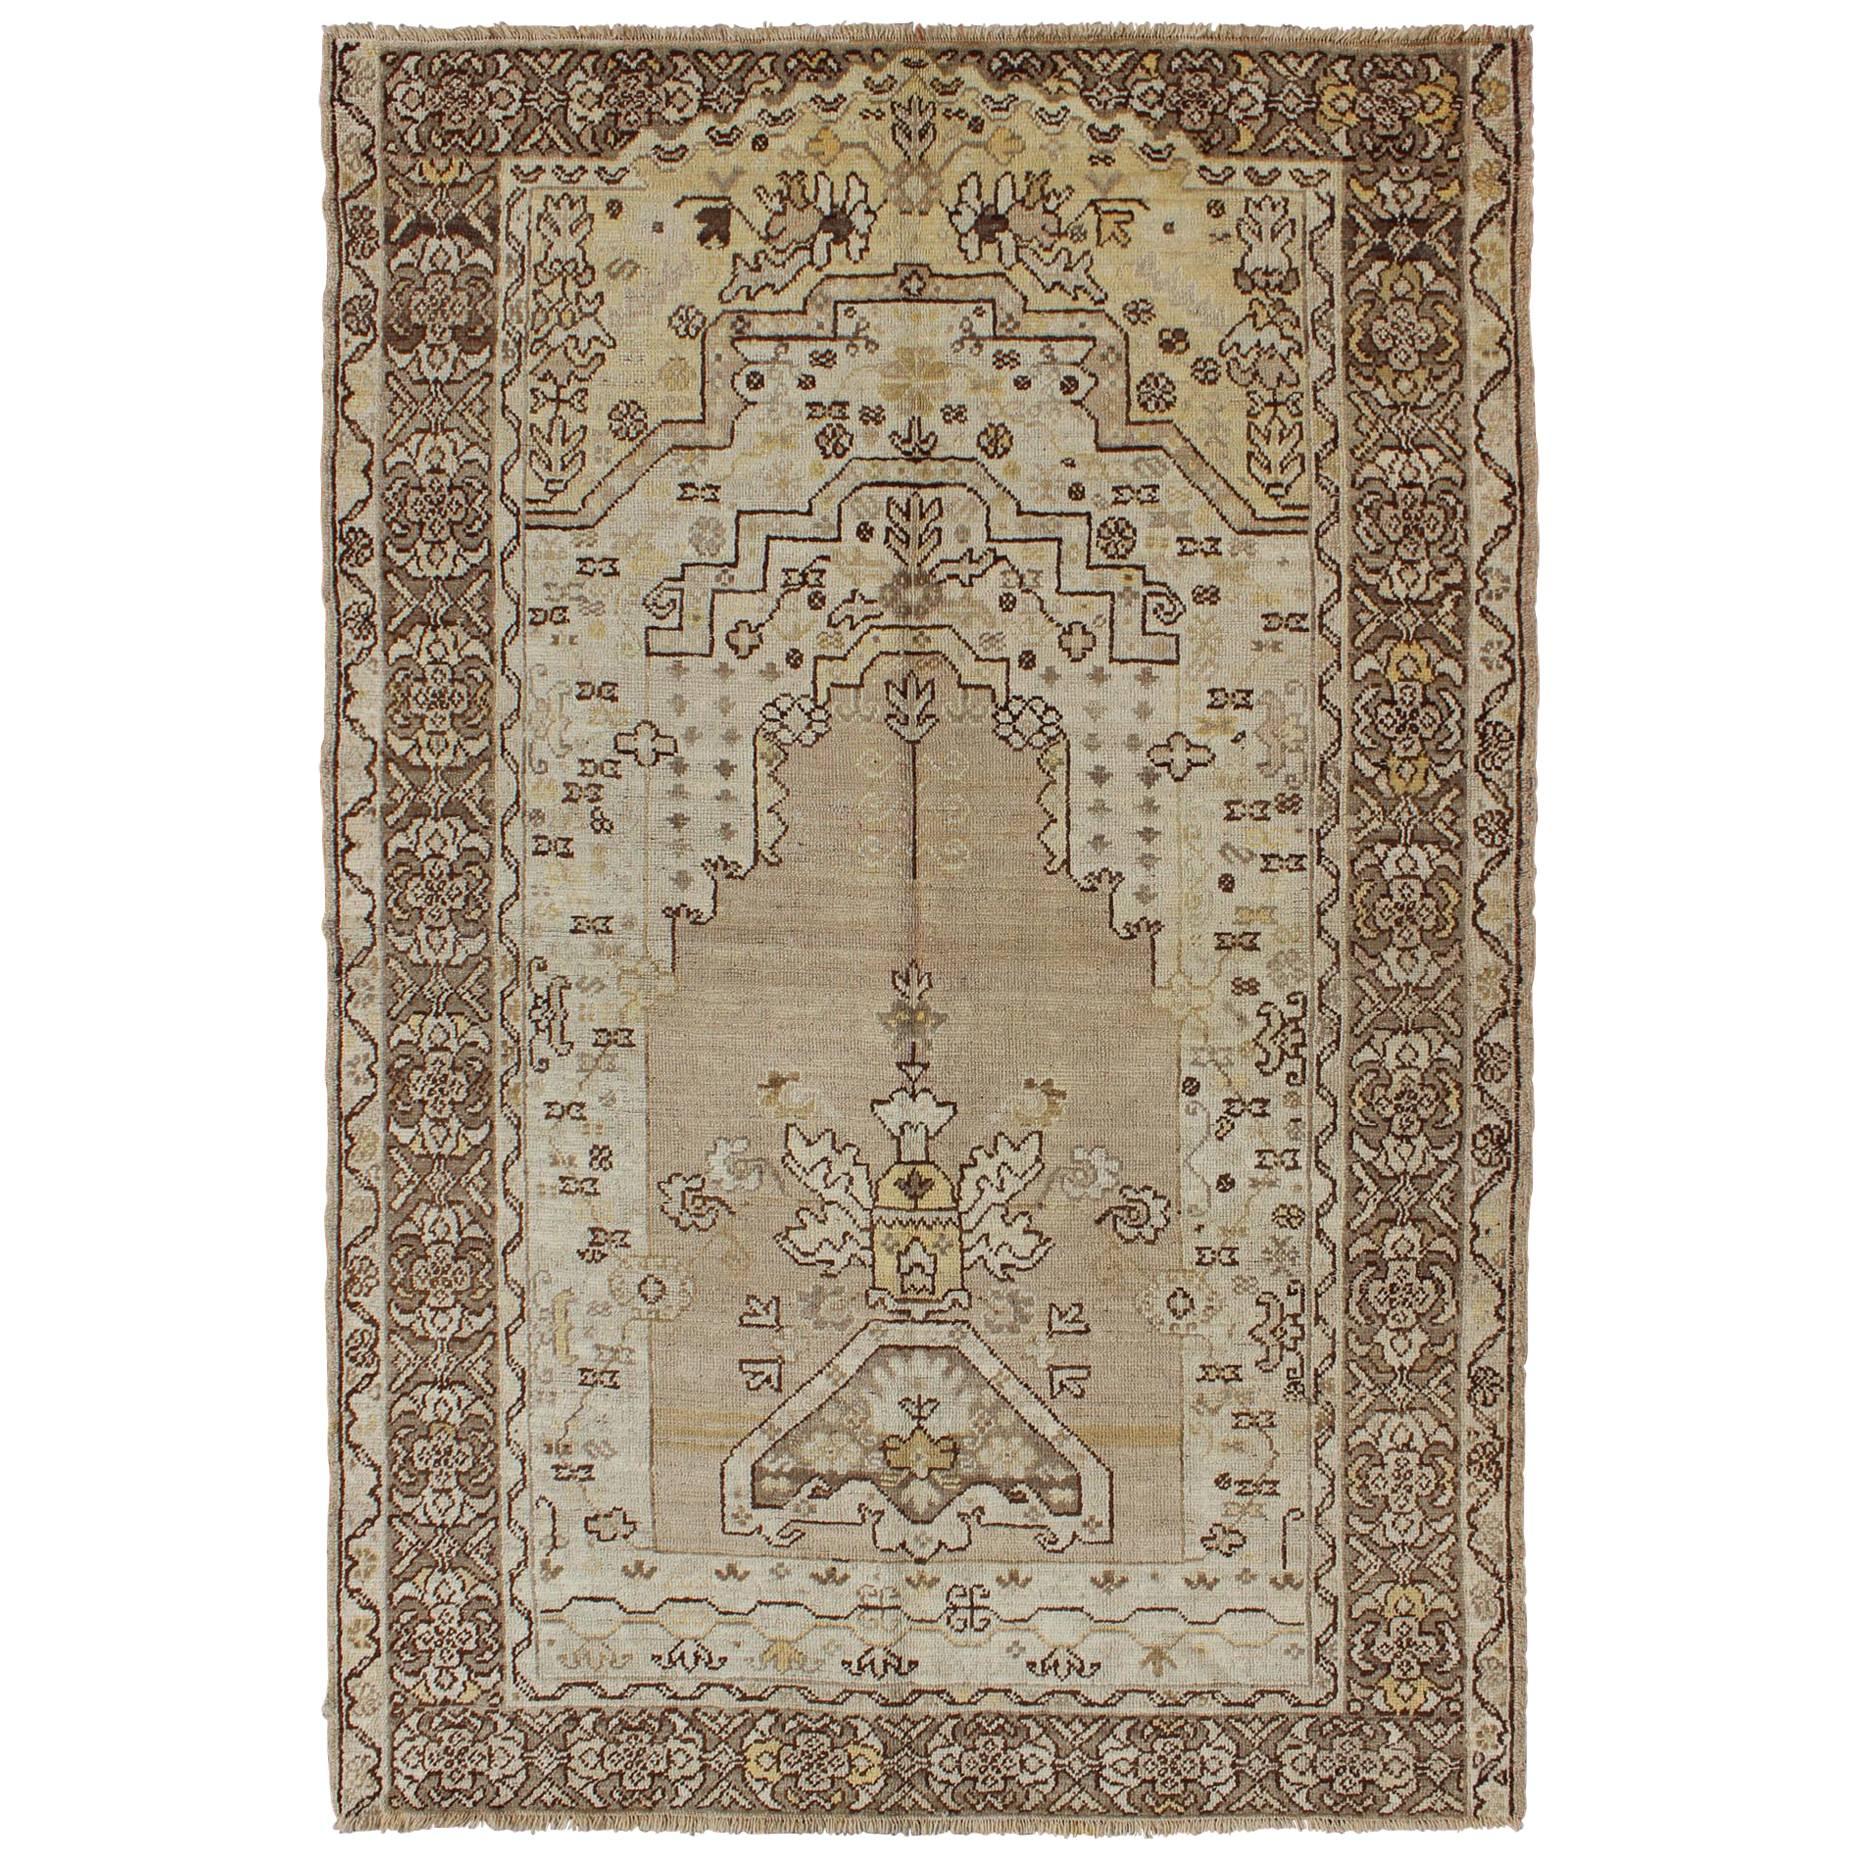 1920s Antique Turkish Oushak Prayer Rug with Flowers in Ivory, Taupe and Cream